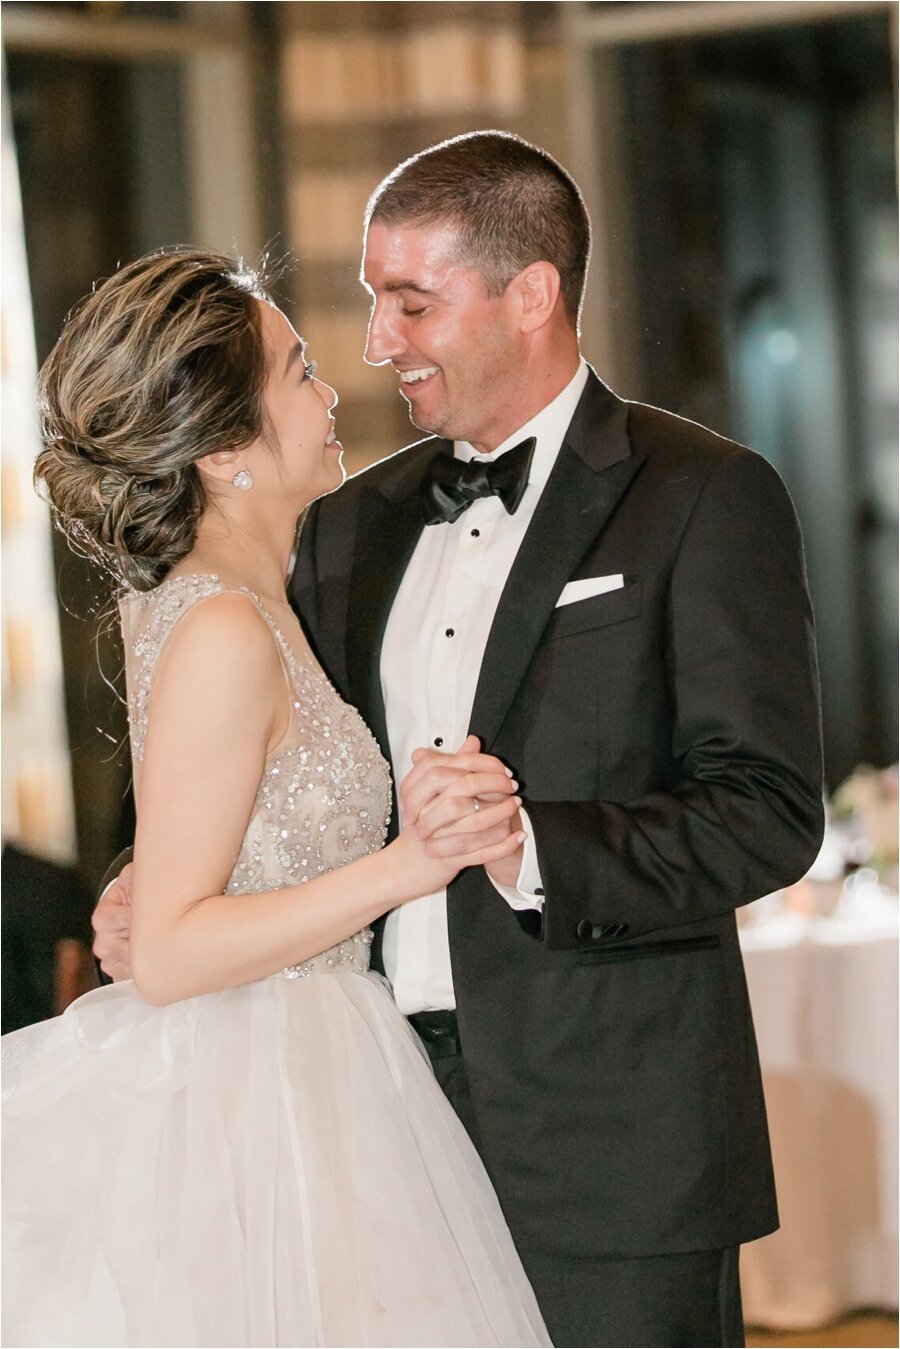 Bride and Groom have their first dance on their wedding day at The Peninsula Hotel Chicago